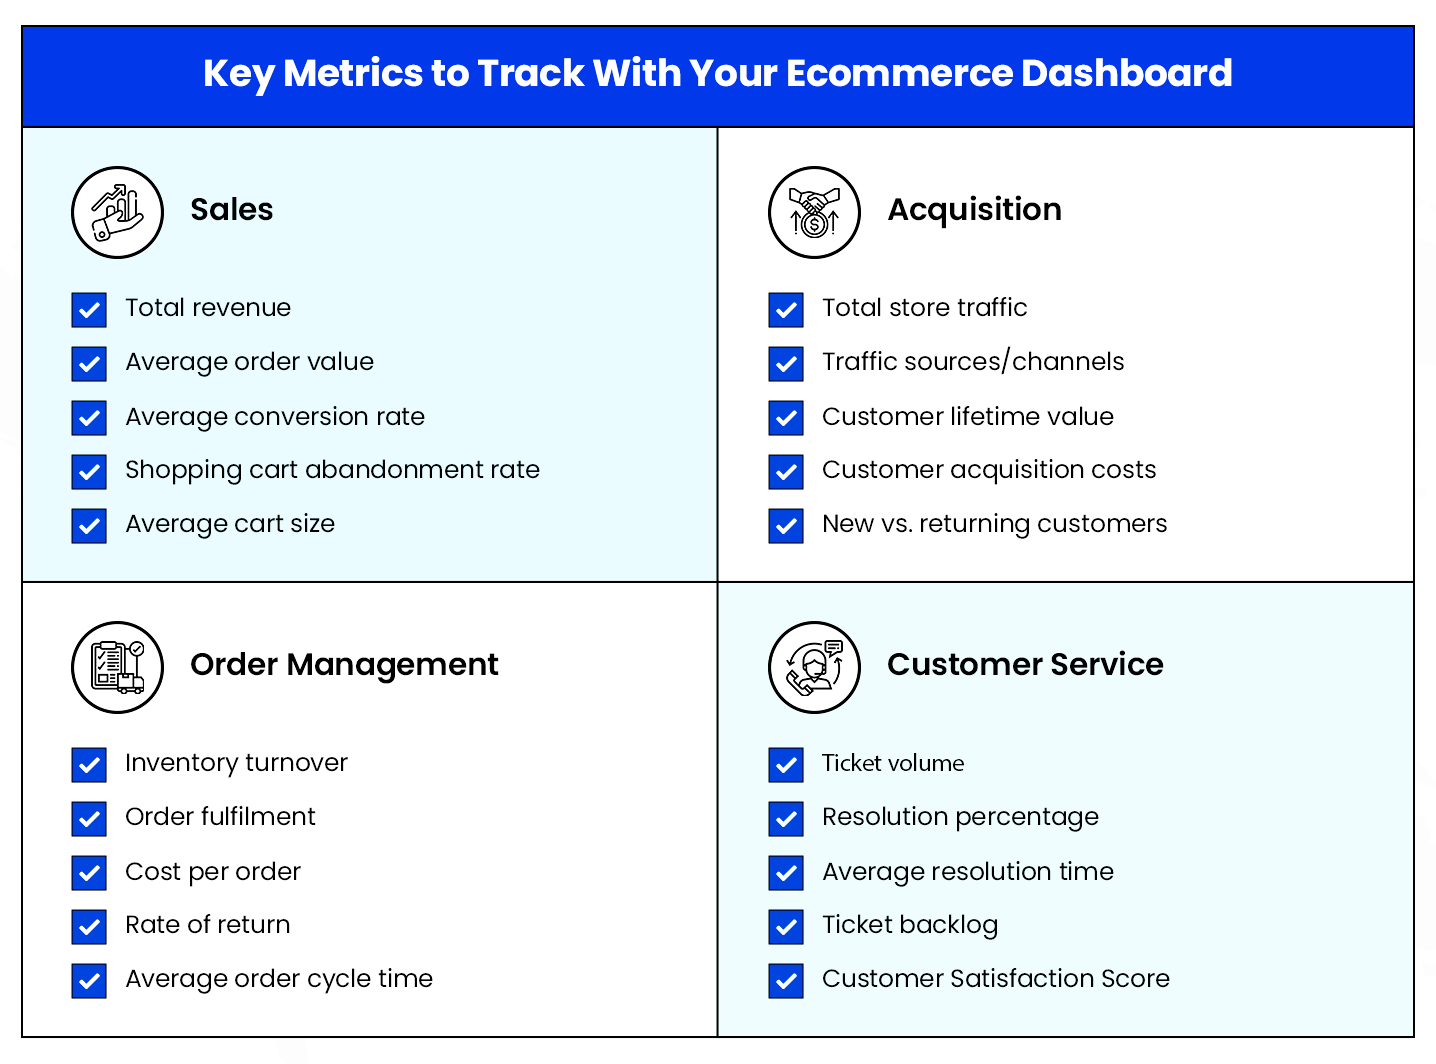 Key metrics to track on your ecommerce dashboard.